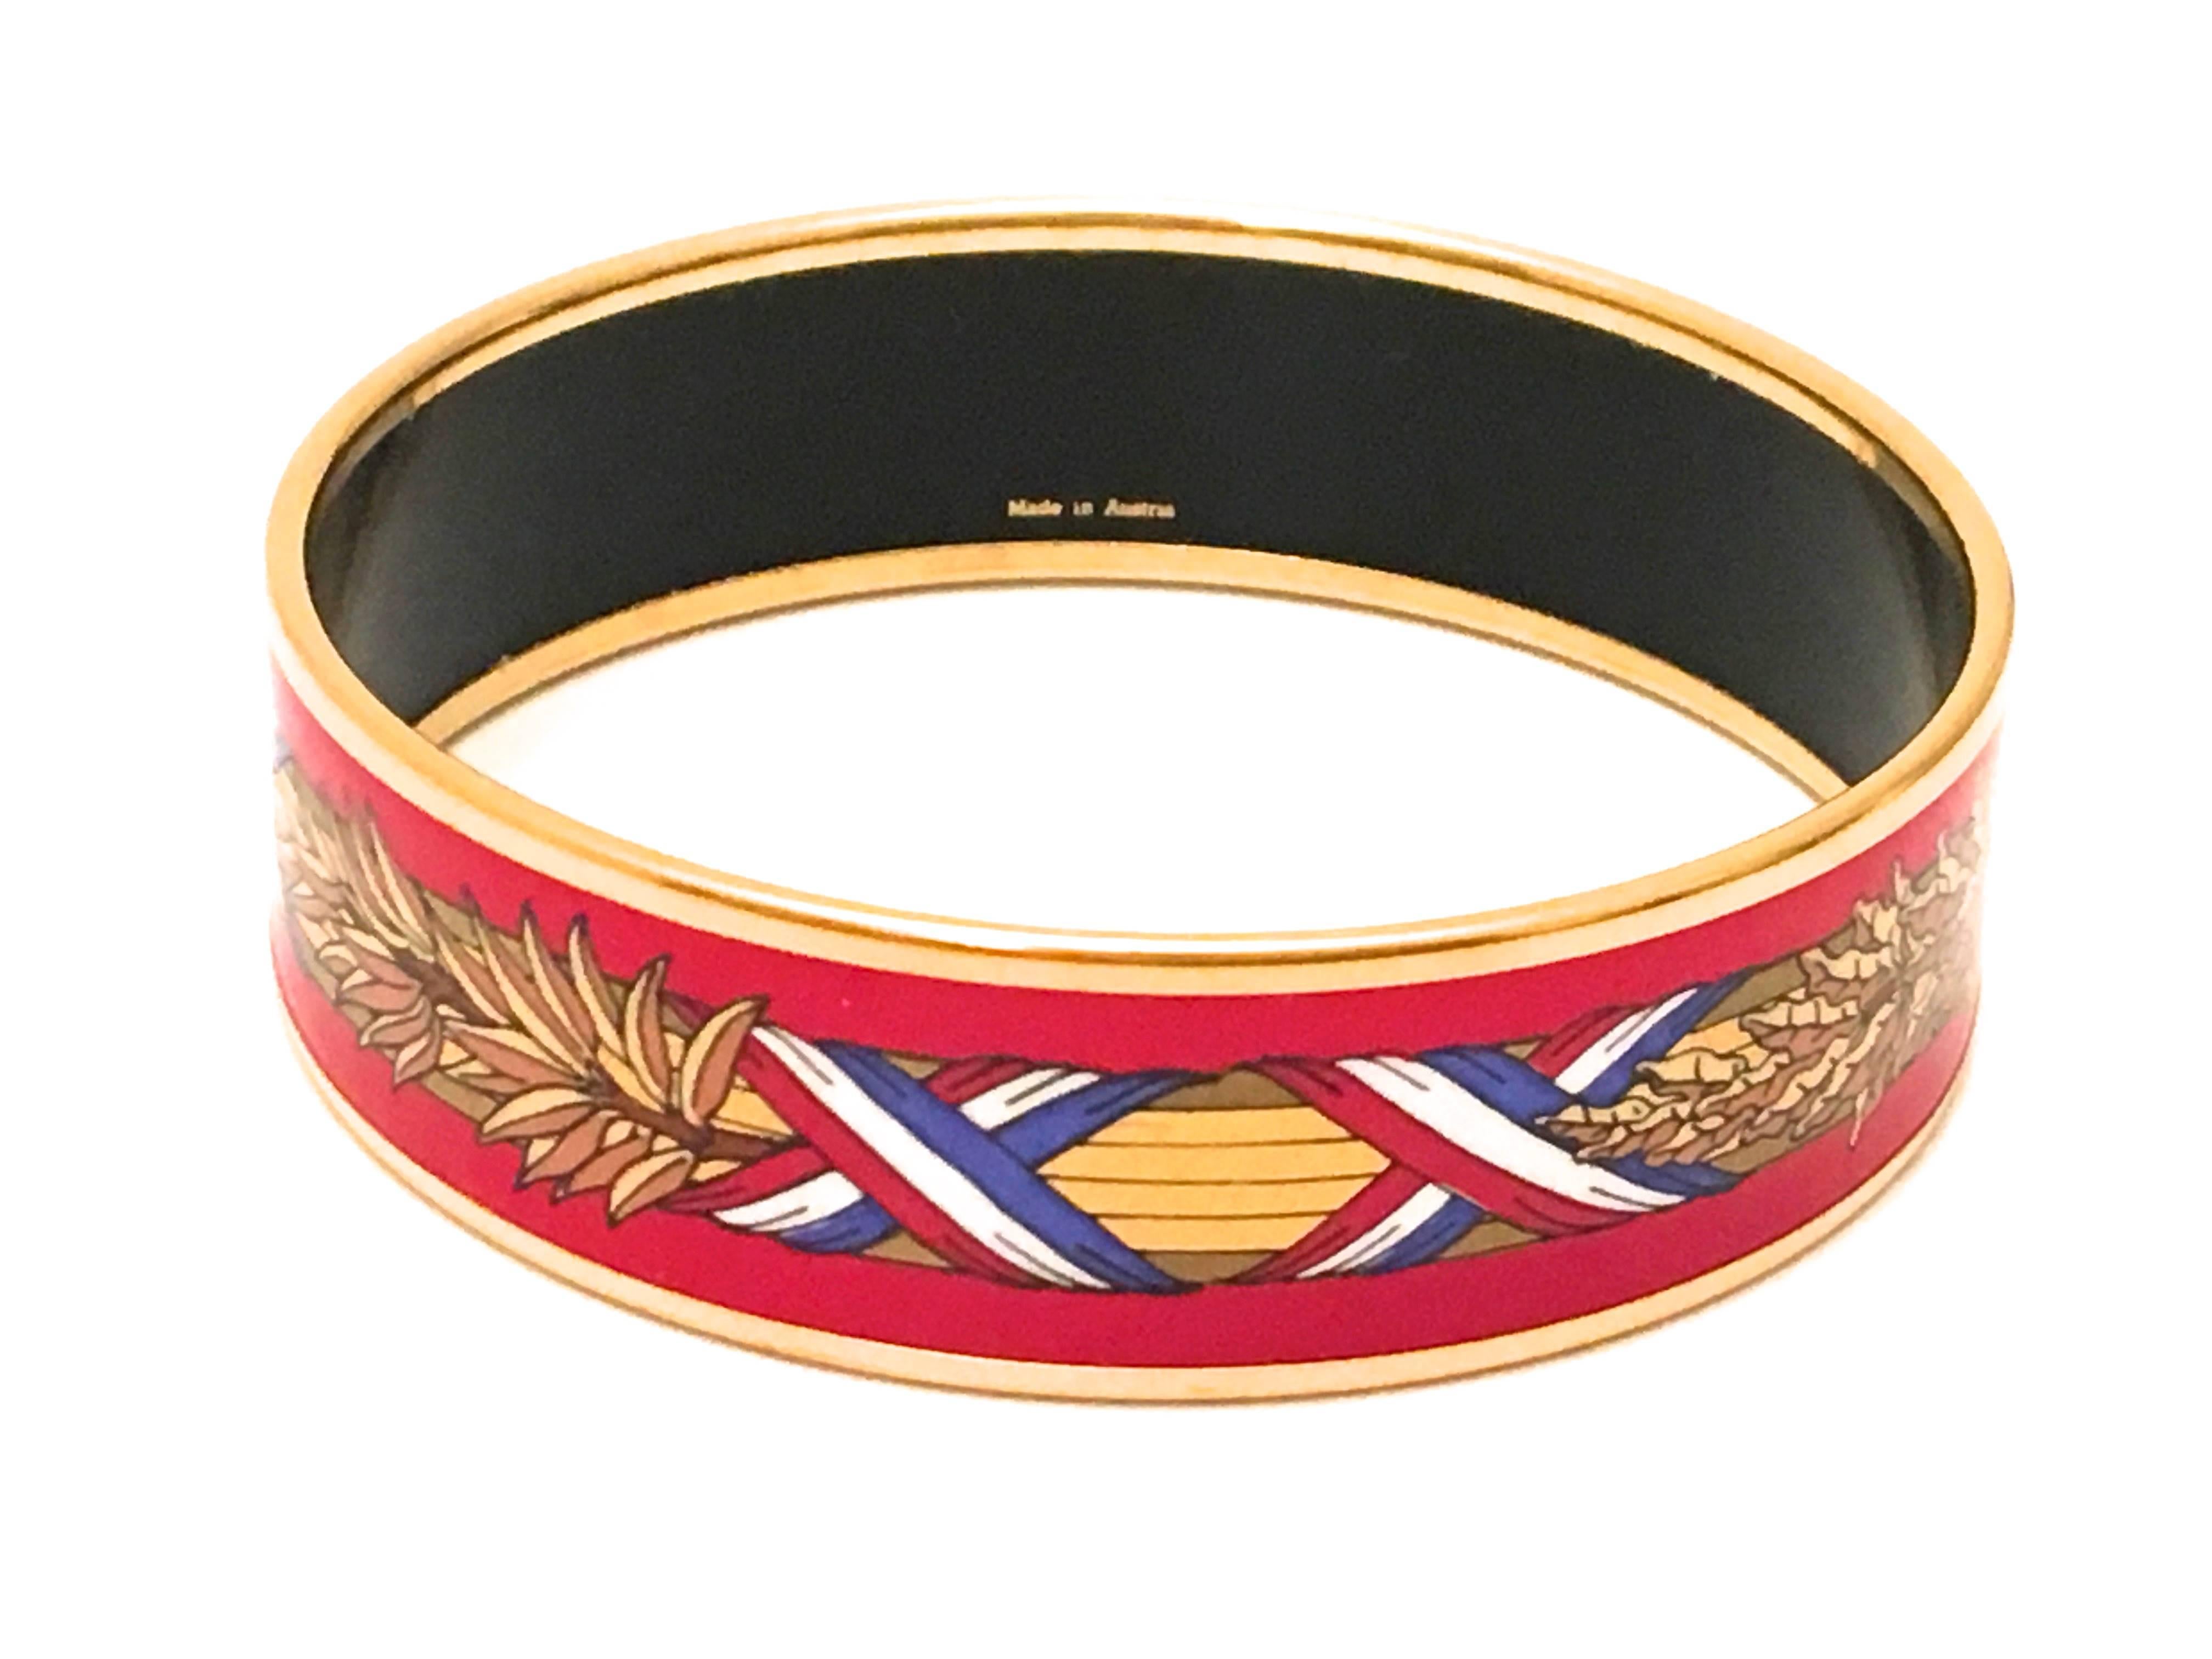 Presented here is a beautiful enamel bracelet from Hermes Paris. The bracelet is a GM size which is 2.75 inches in diameter and is a size Large  which is .75 inches wide. The design features a combination of red, white, blue, and gold and is